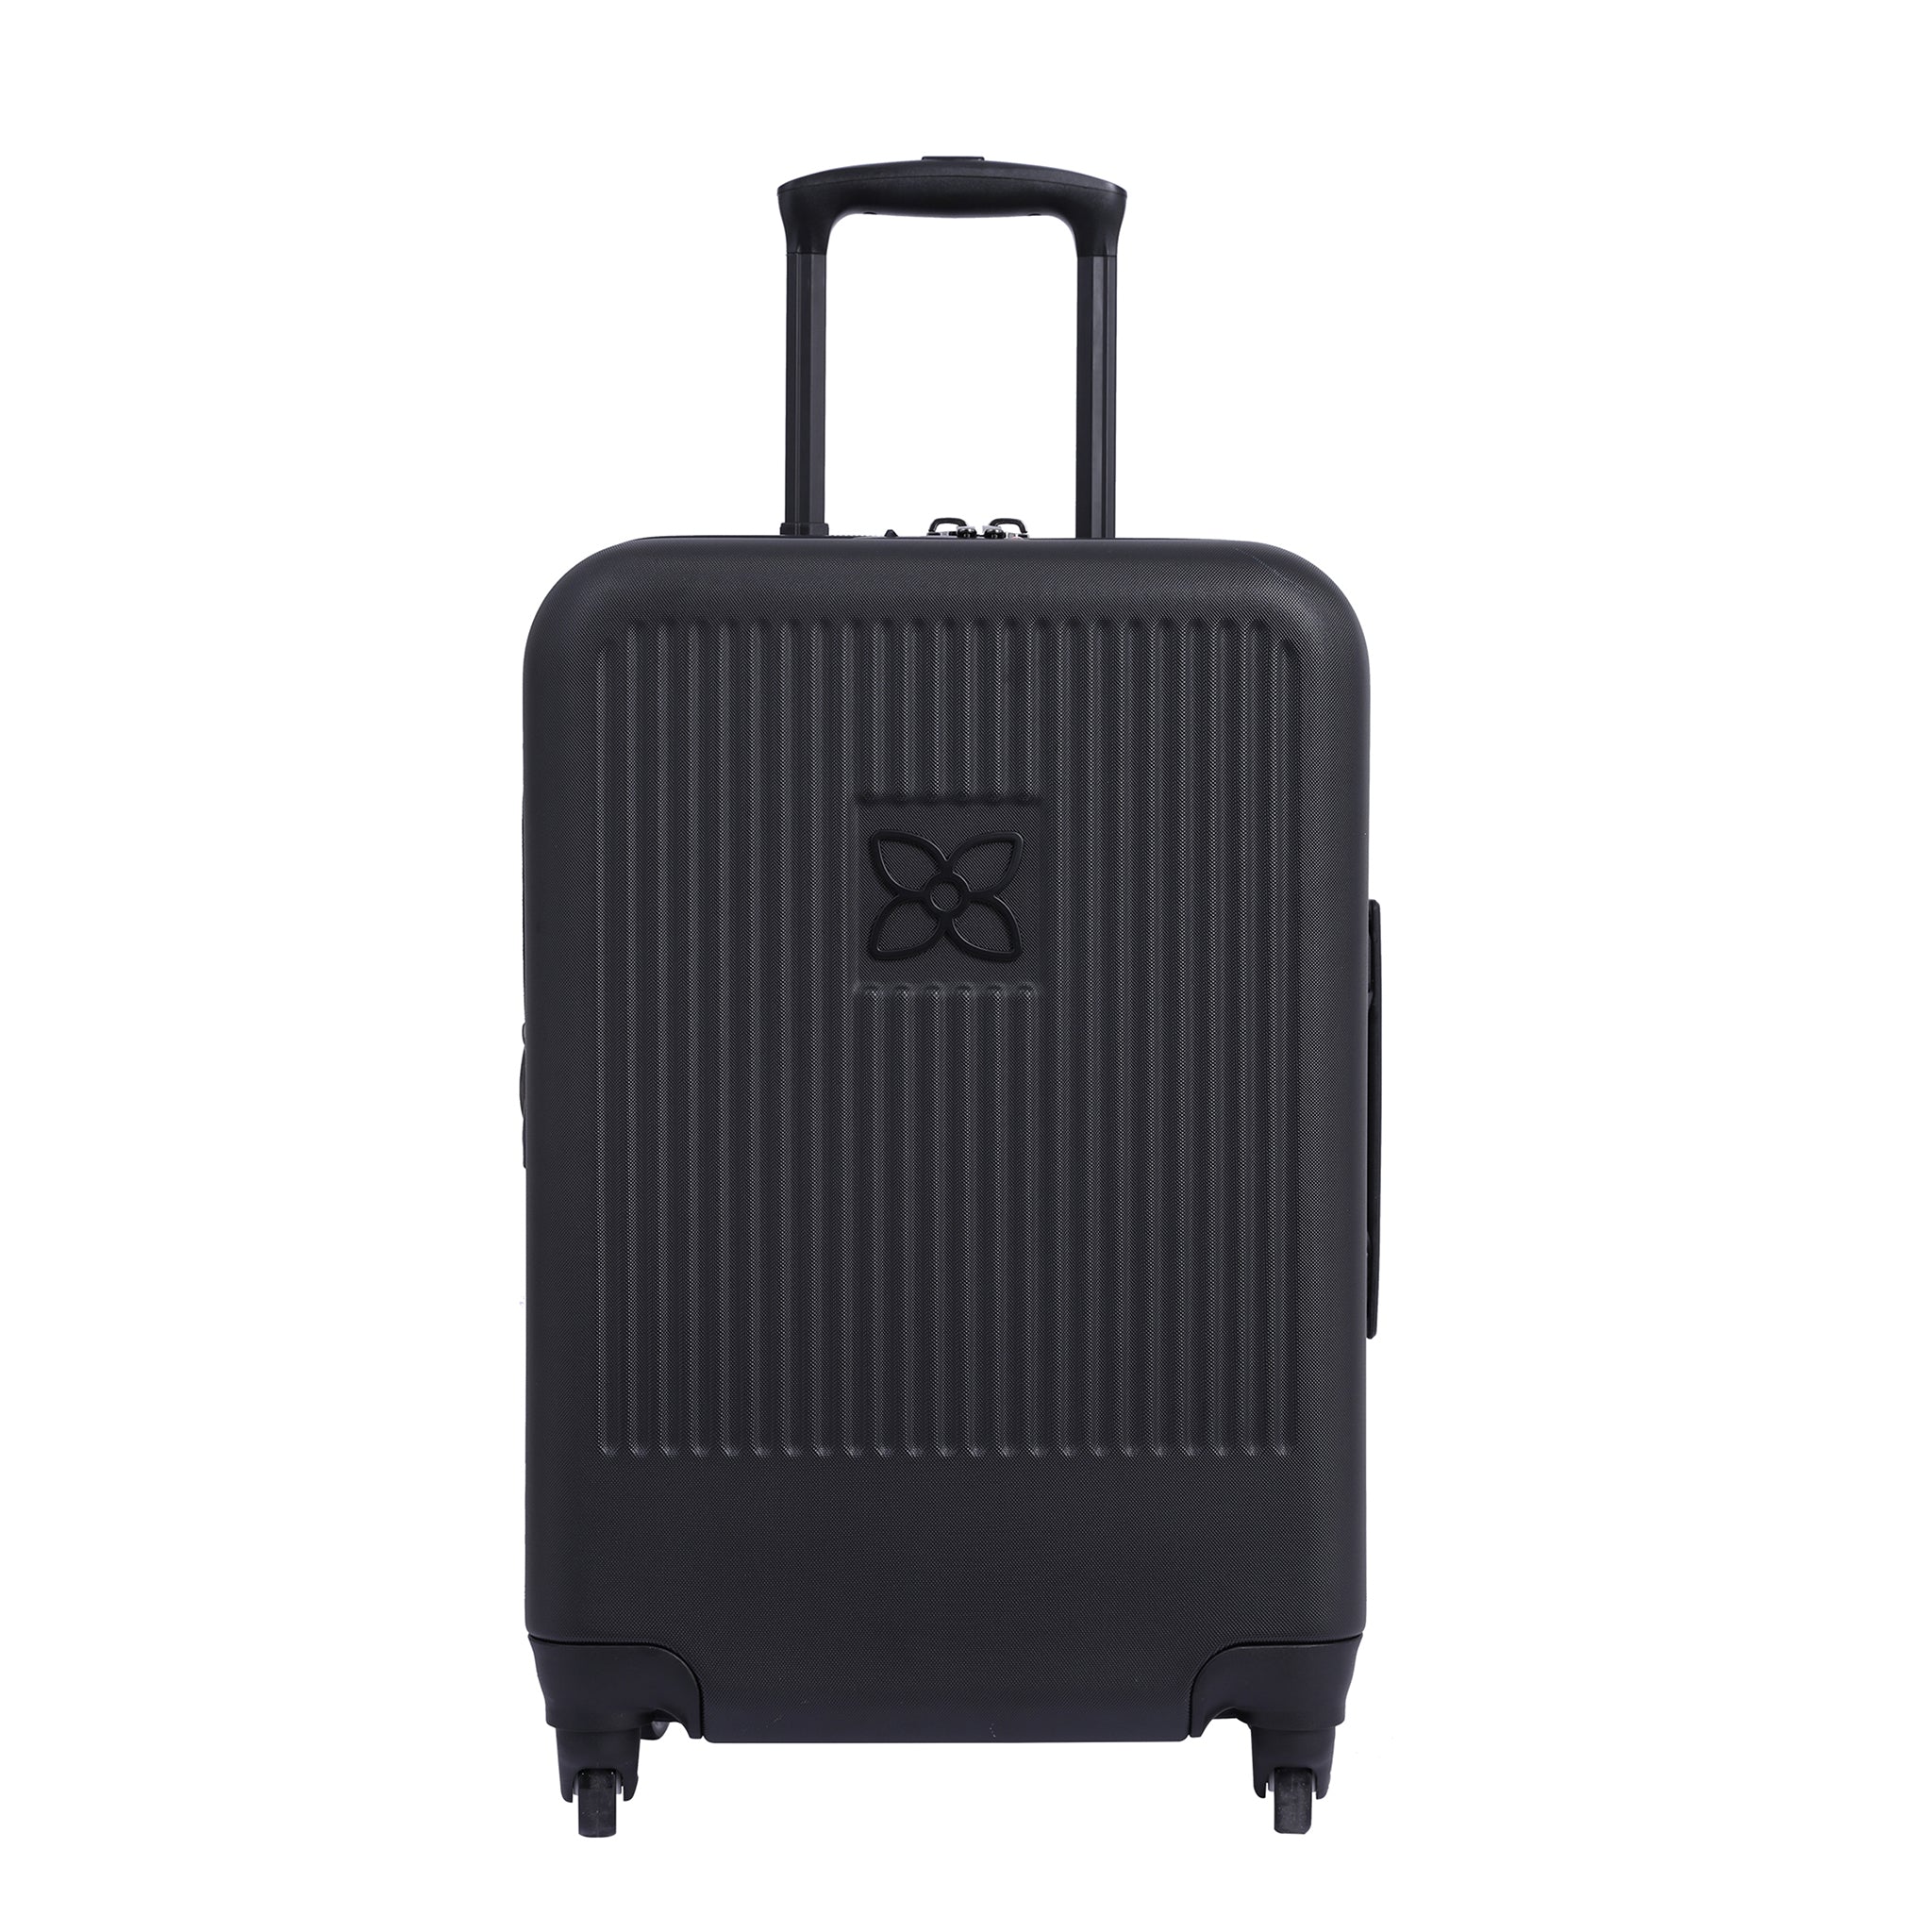 Sherpani hard shell luggage the Meridian. Part of Sherpani Travel Carry on Bundle in Classic Black. 